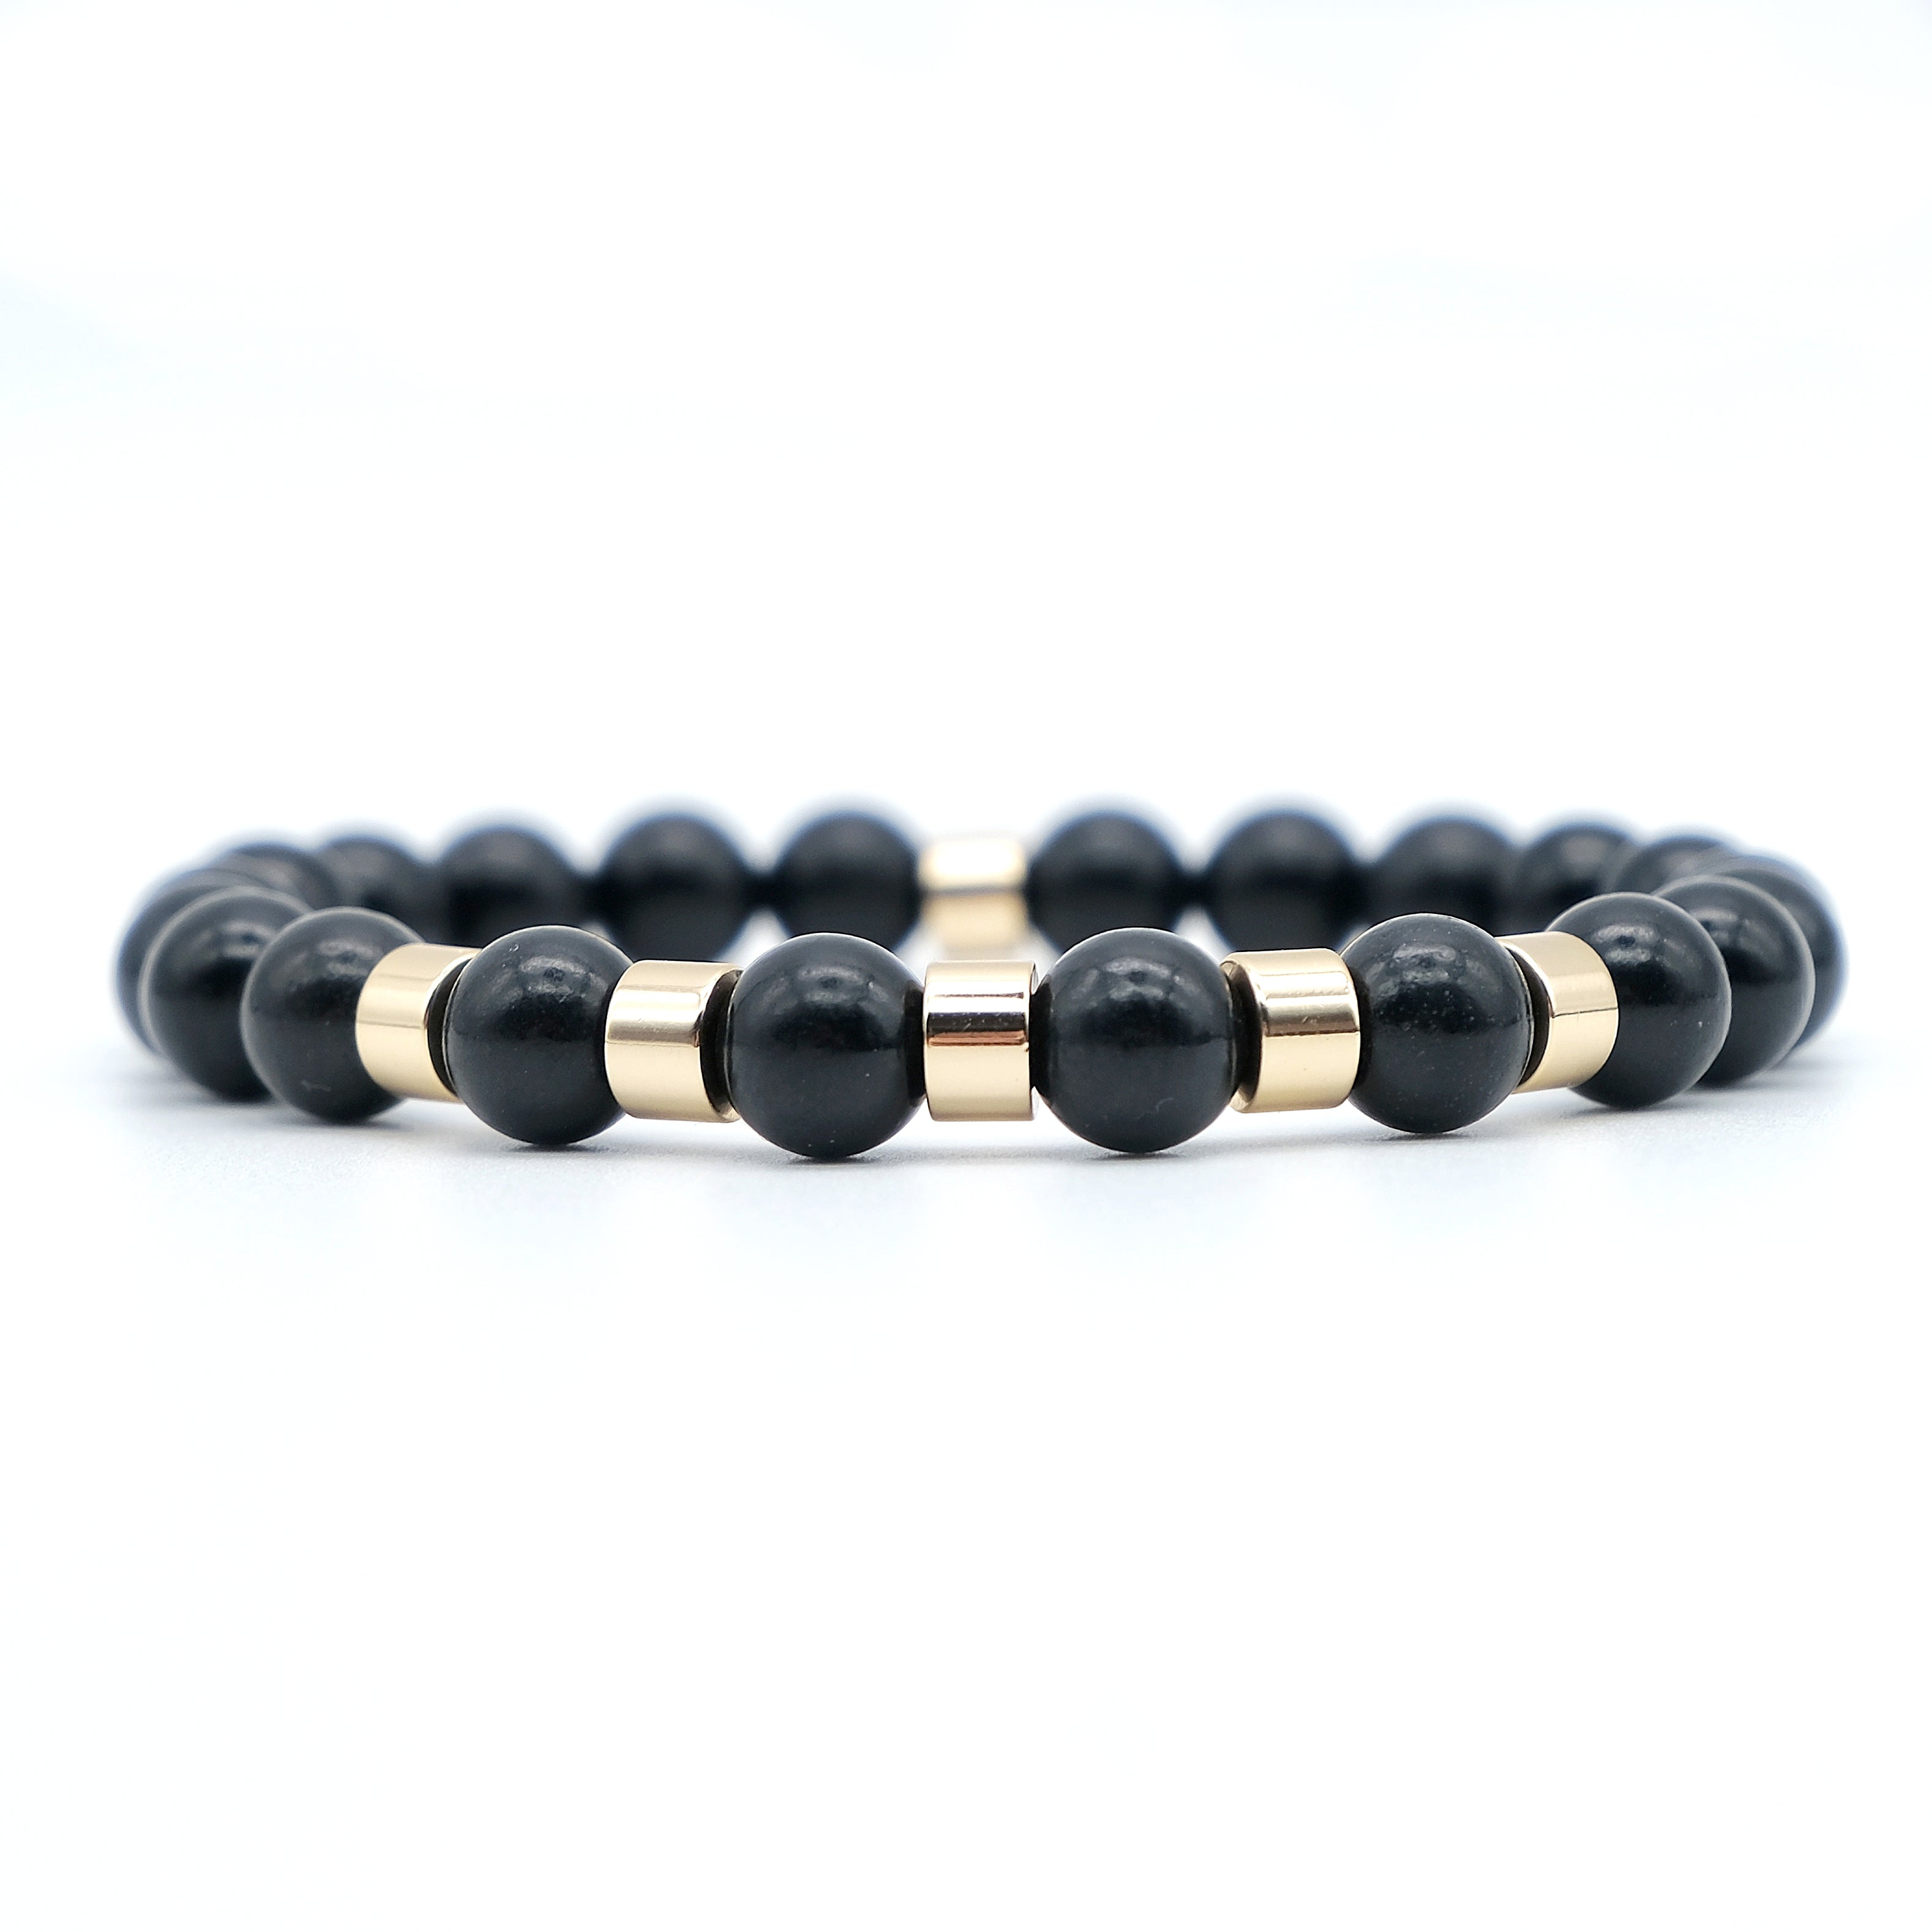 A shungite gemstone bracelet with gold accessories